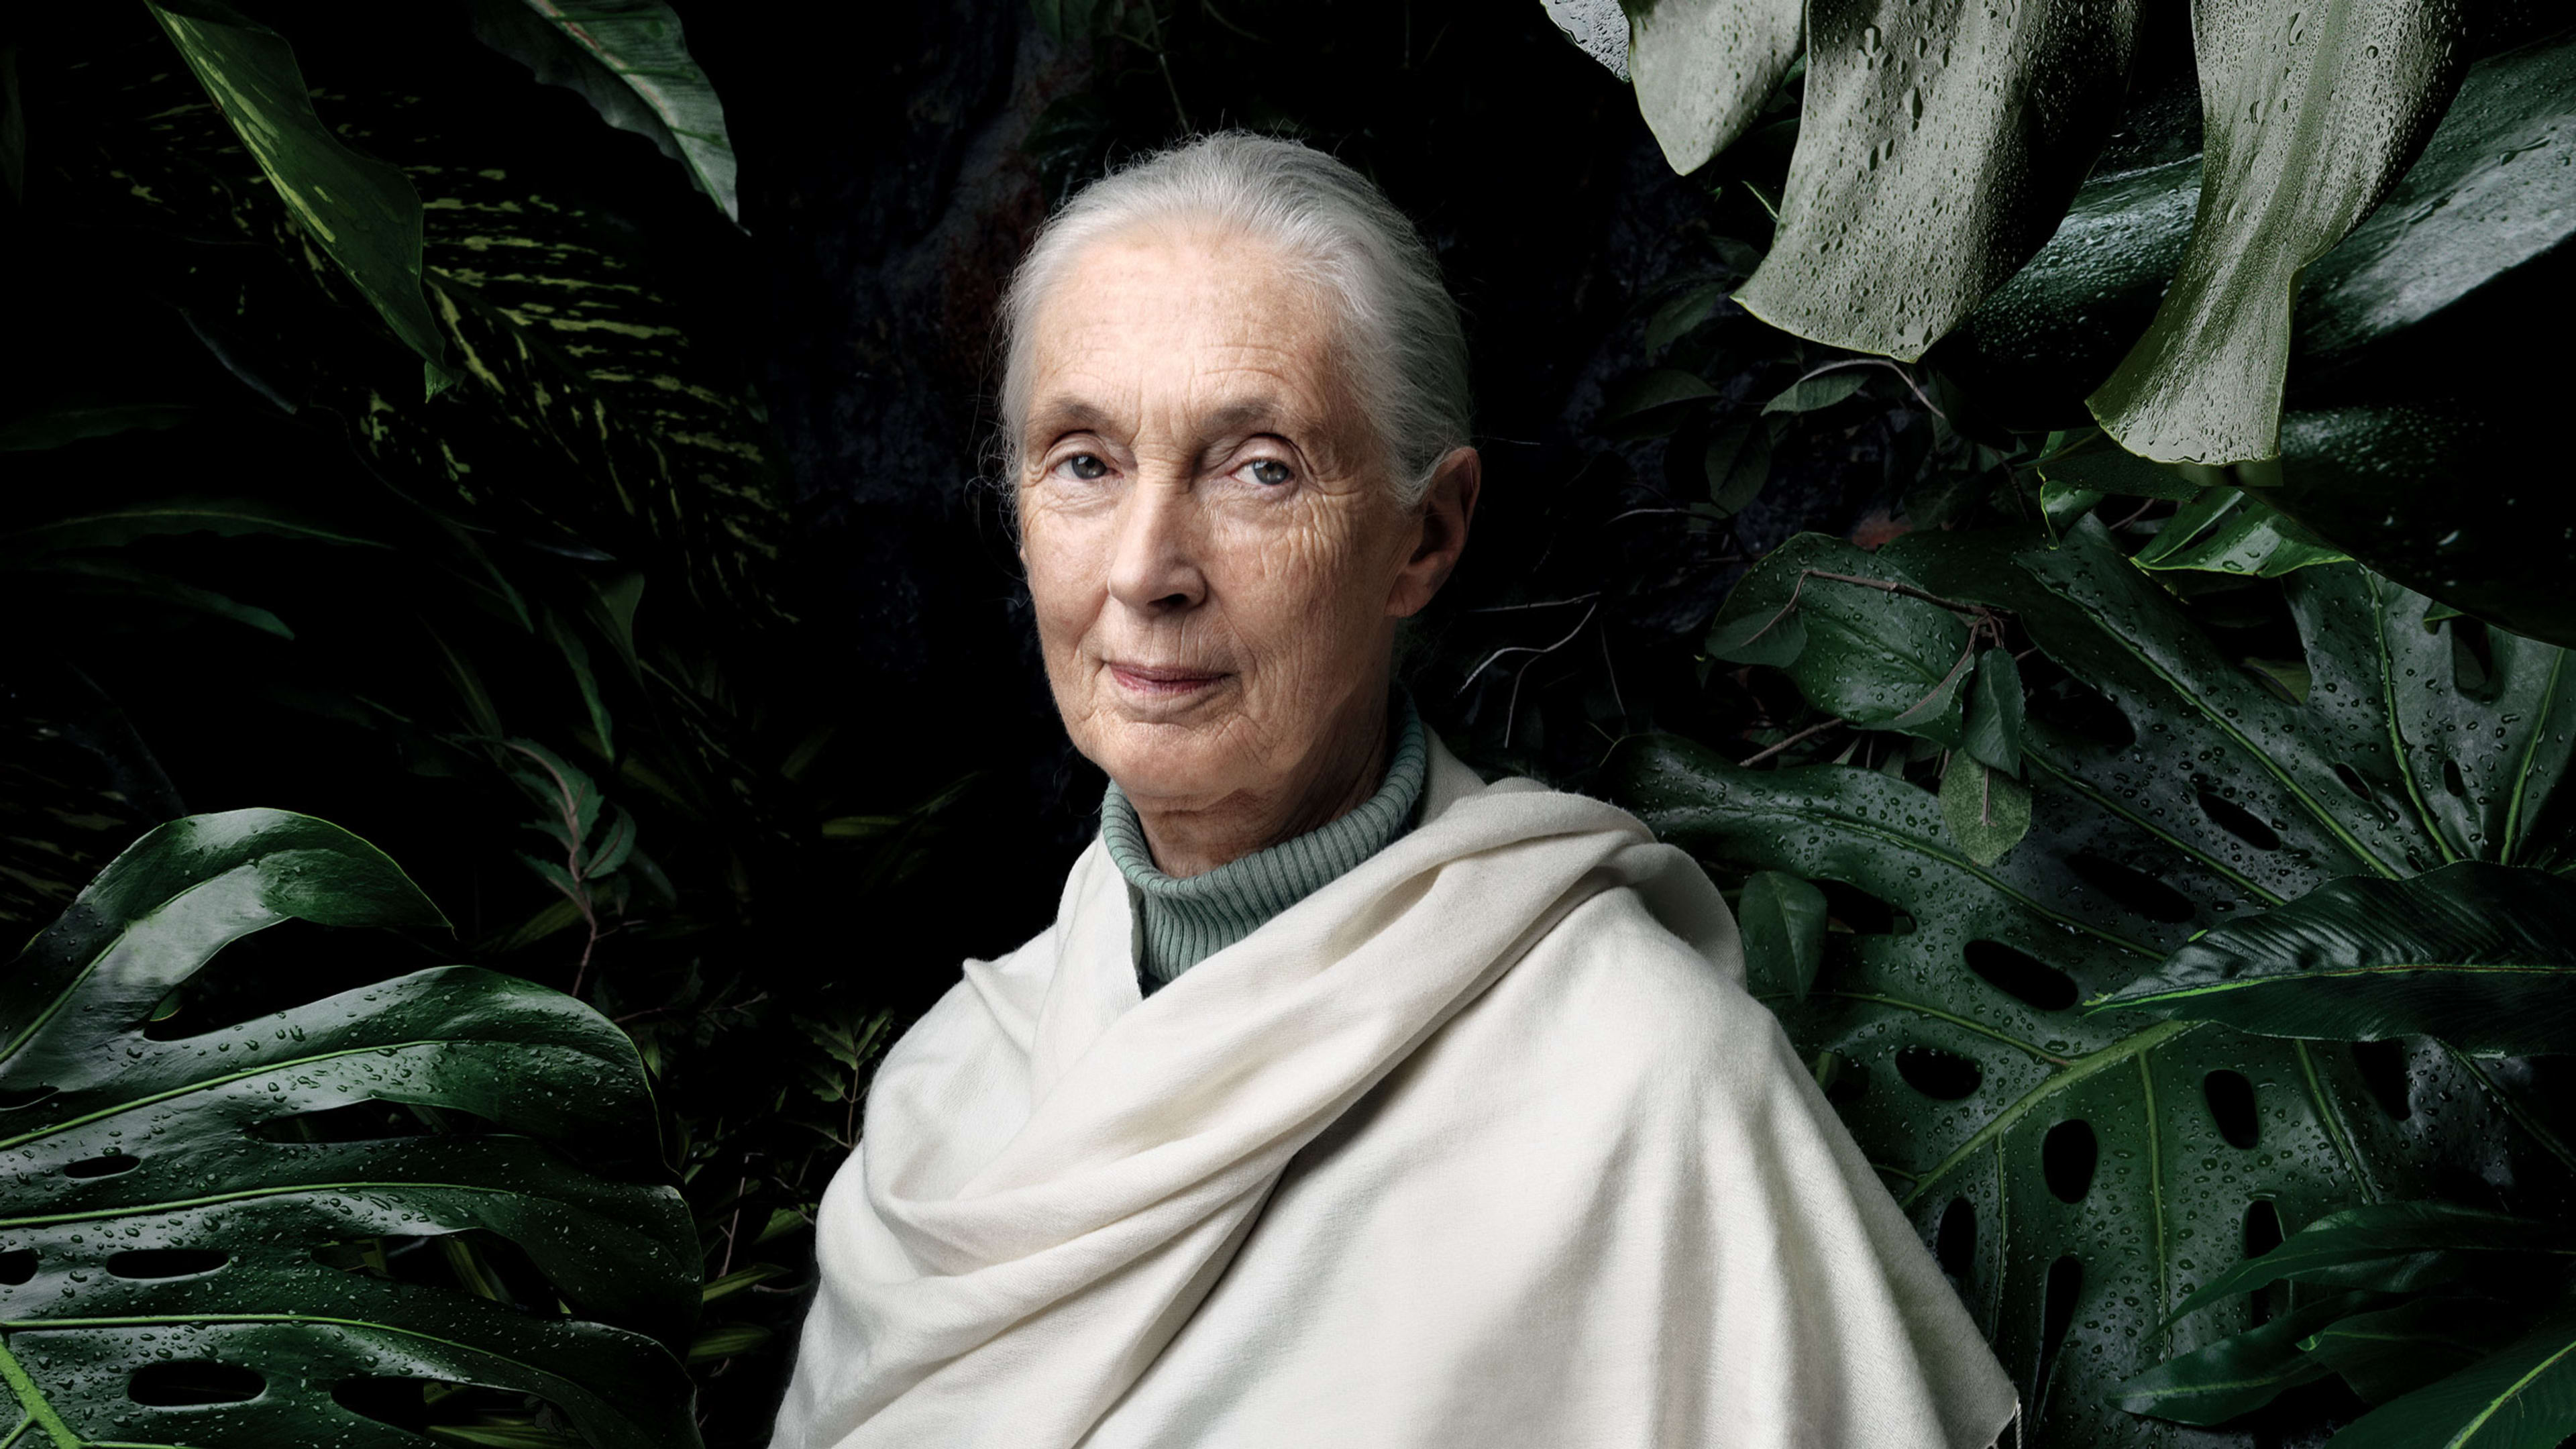 Jane Goodall would love to pet your dog, if that’s okay